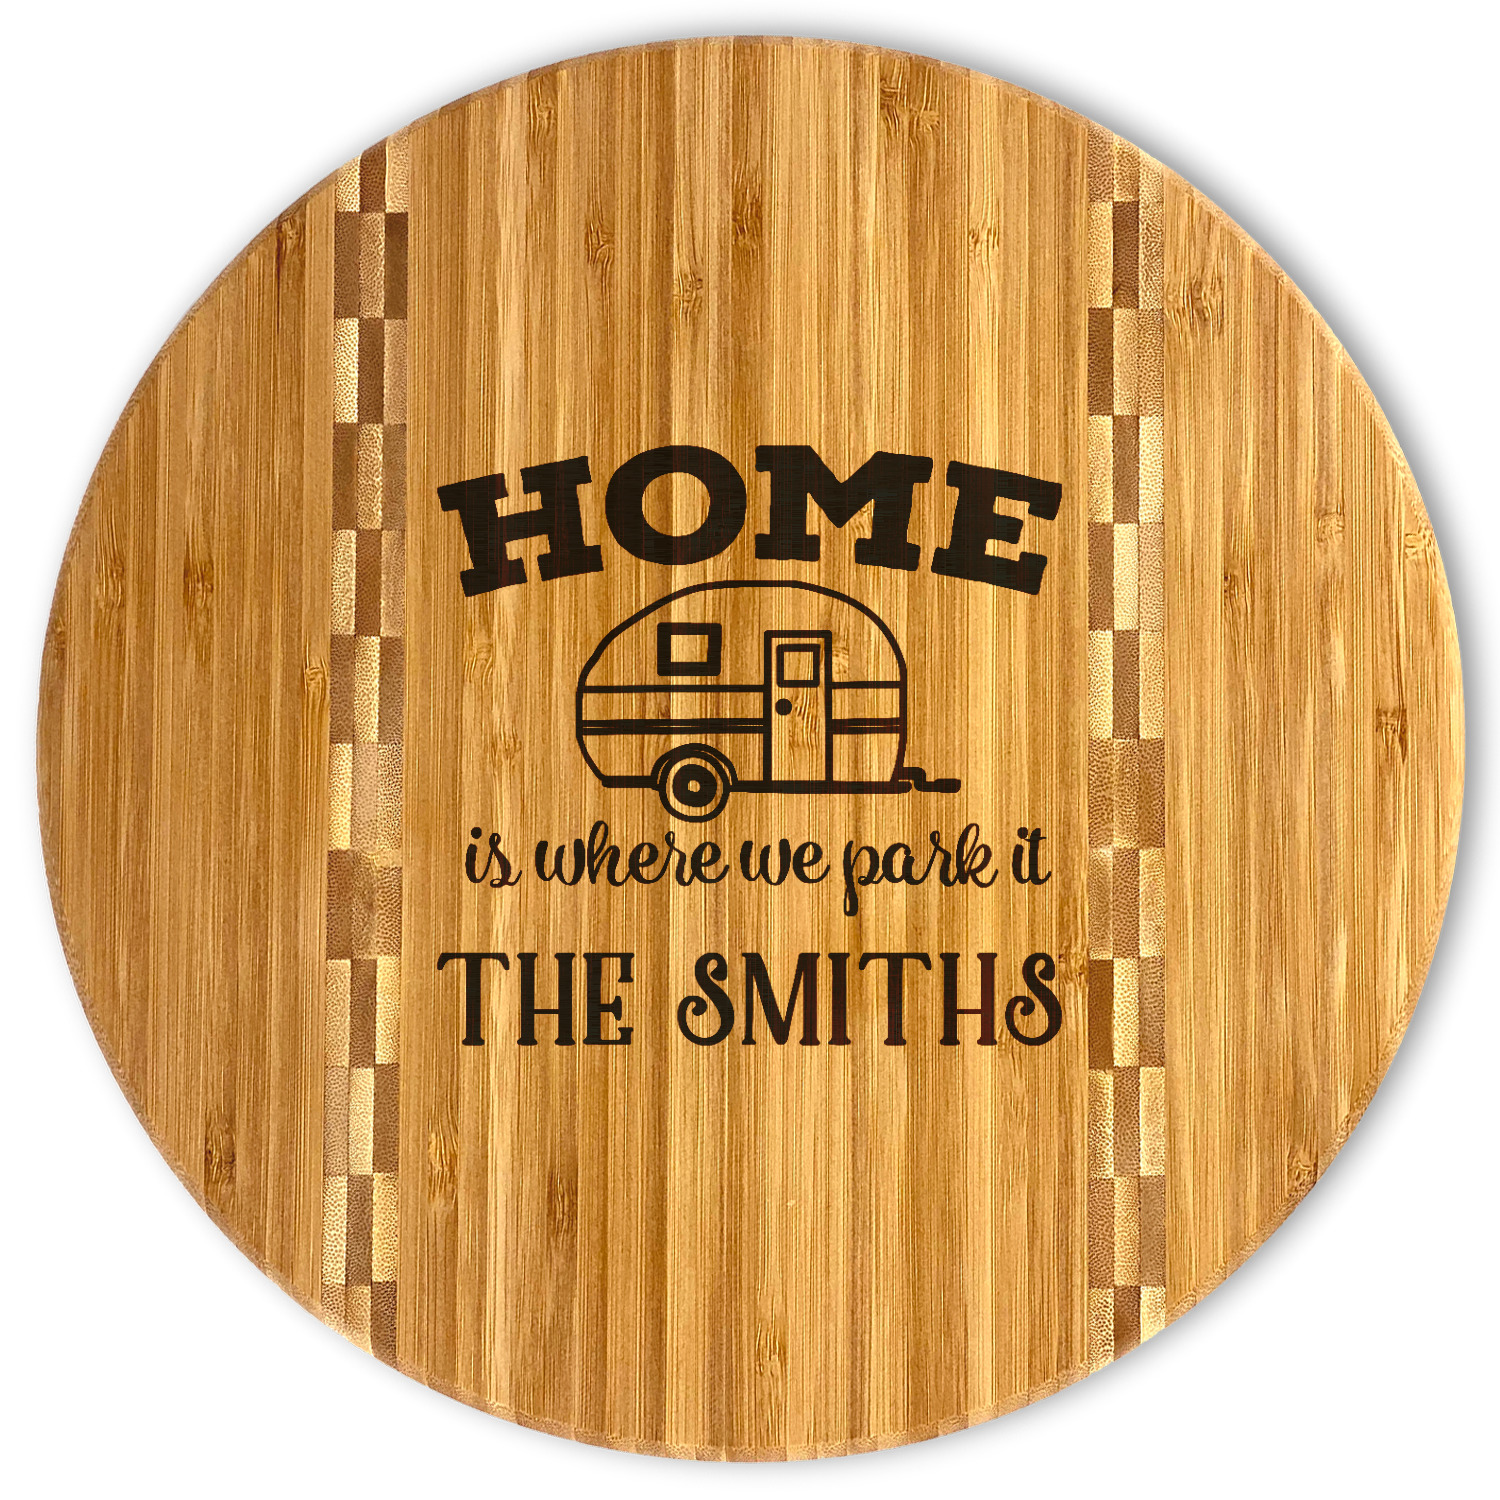 https://www.youcustomizeit.com/common/MAKE/1764509/Camper-Bamboo-Cutting-Boards-FRONT.jpg?lm=1658265539